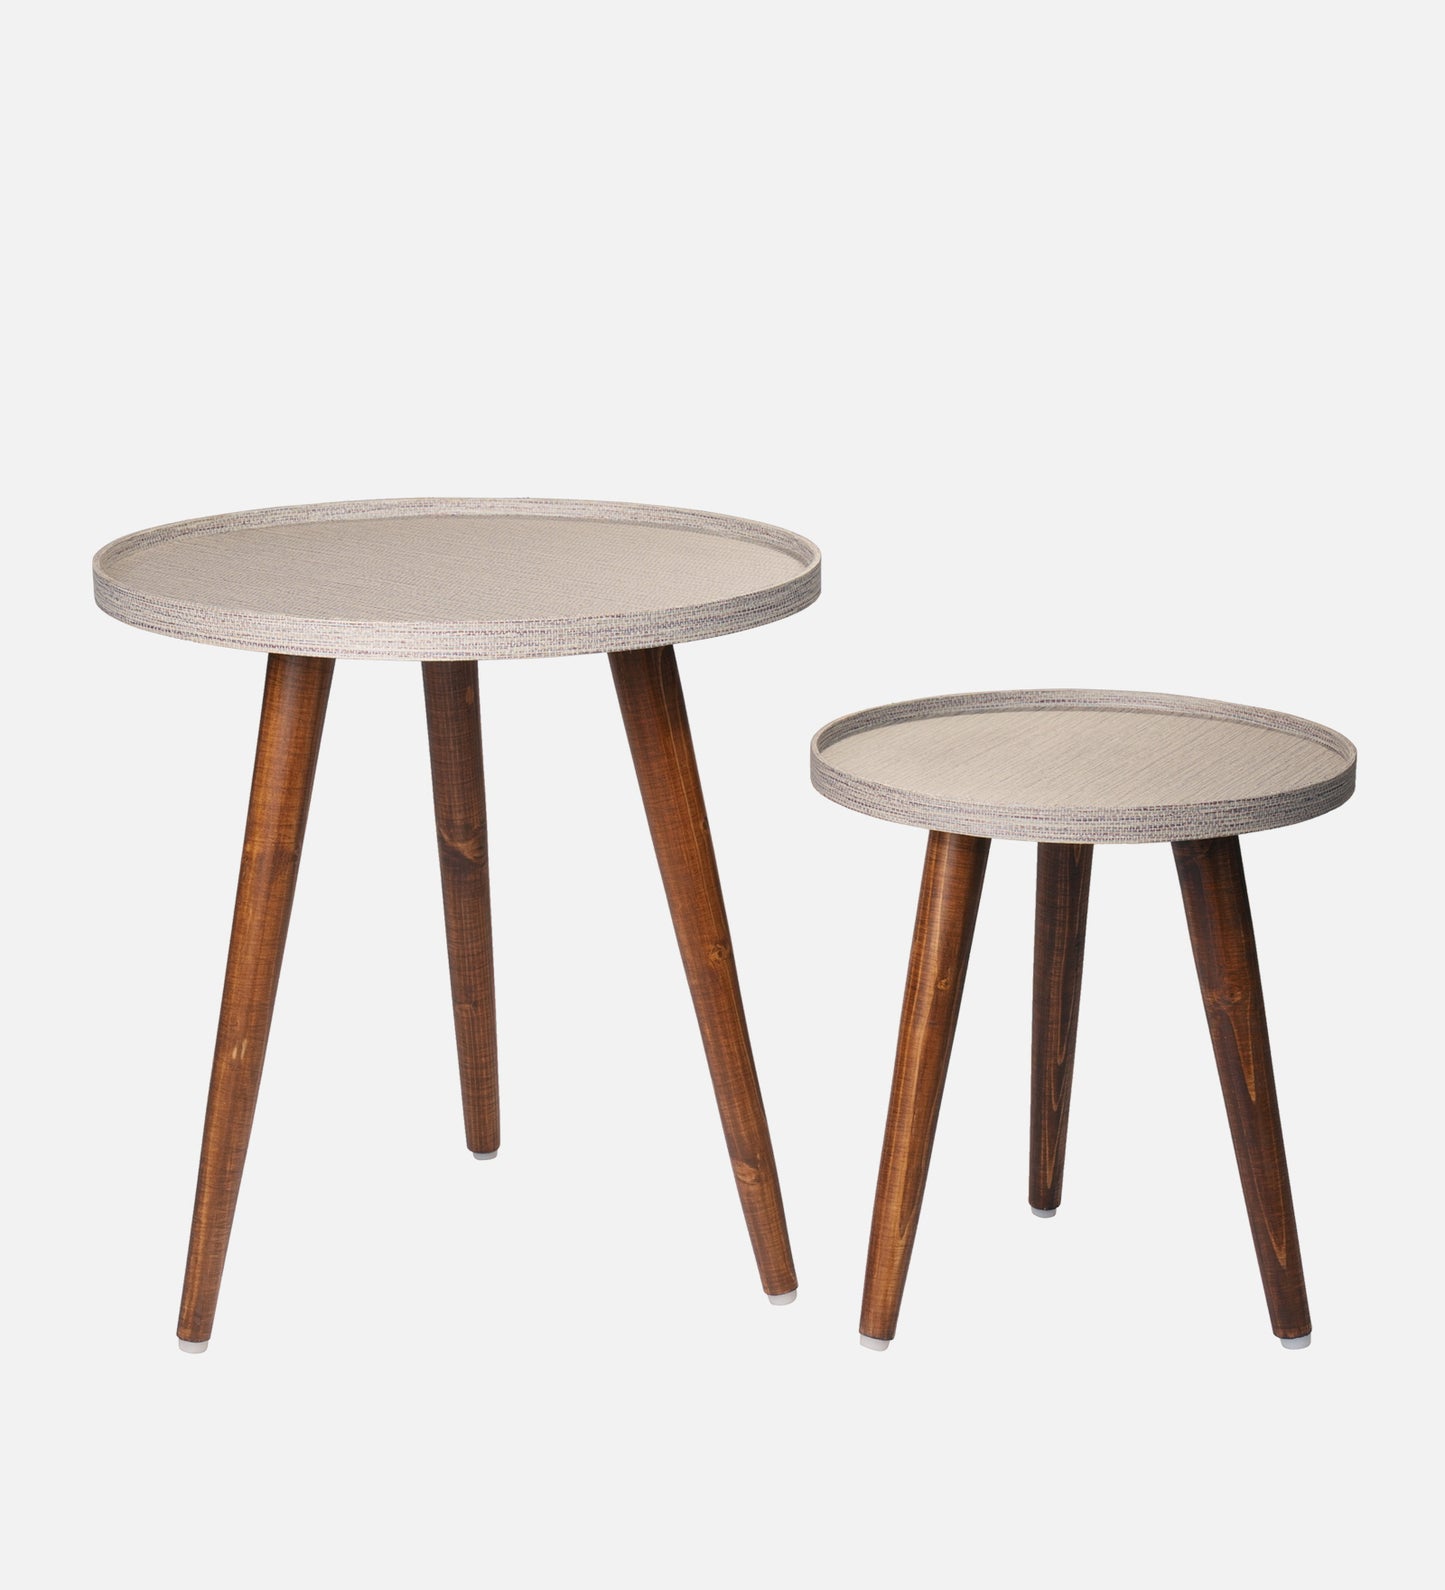 Weave Round Nesting Tables with Wooden Legs, Side Tables, Wooden Tables, Living Room Decor by A Tiny Mistake